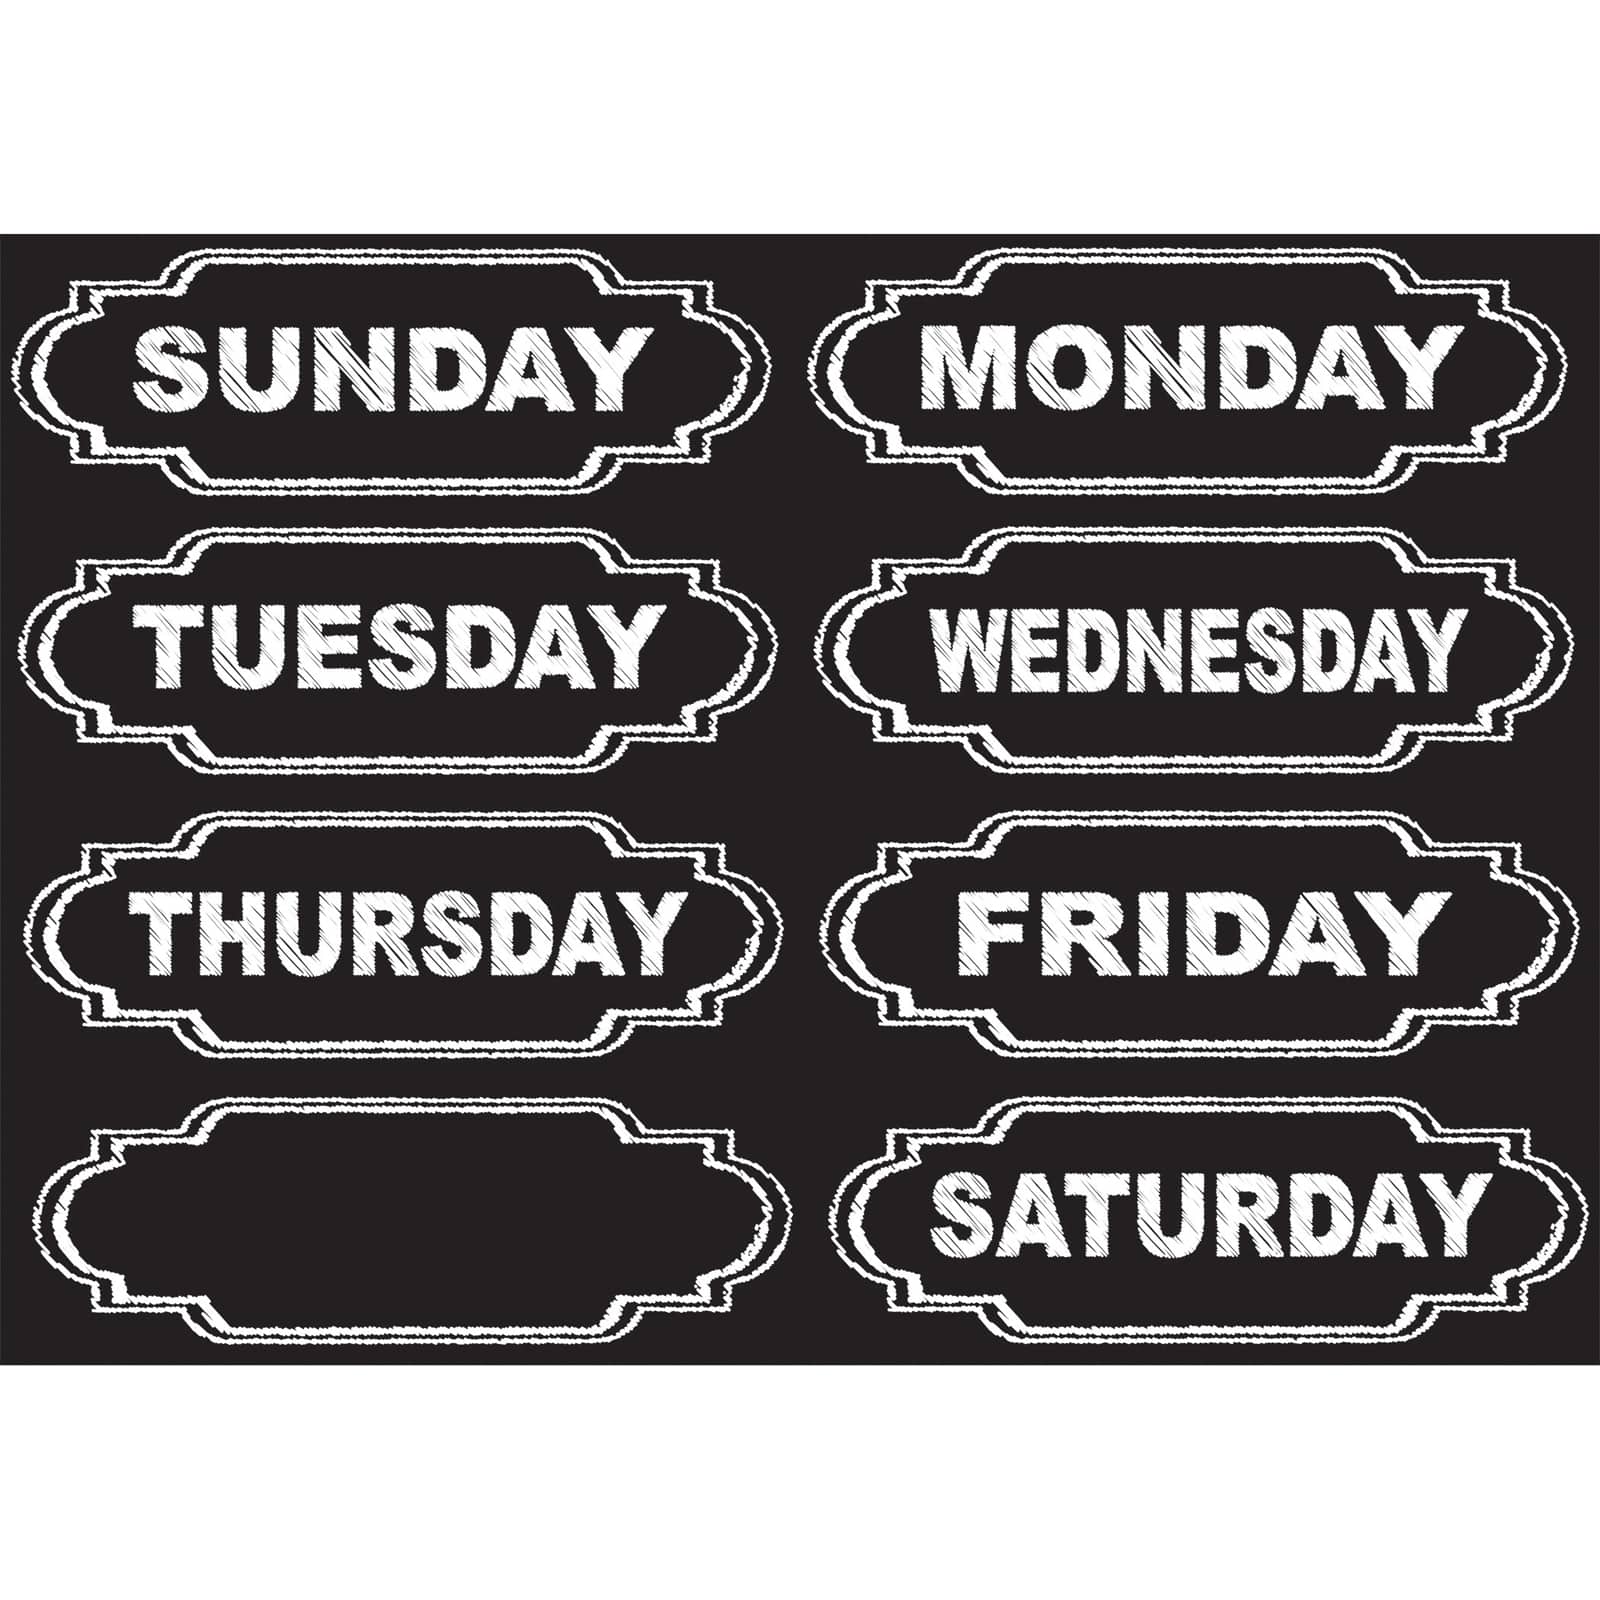 Ashley Productions Chalkboard Days of the Week Magnets, 6 Packs of 8